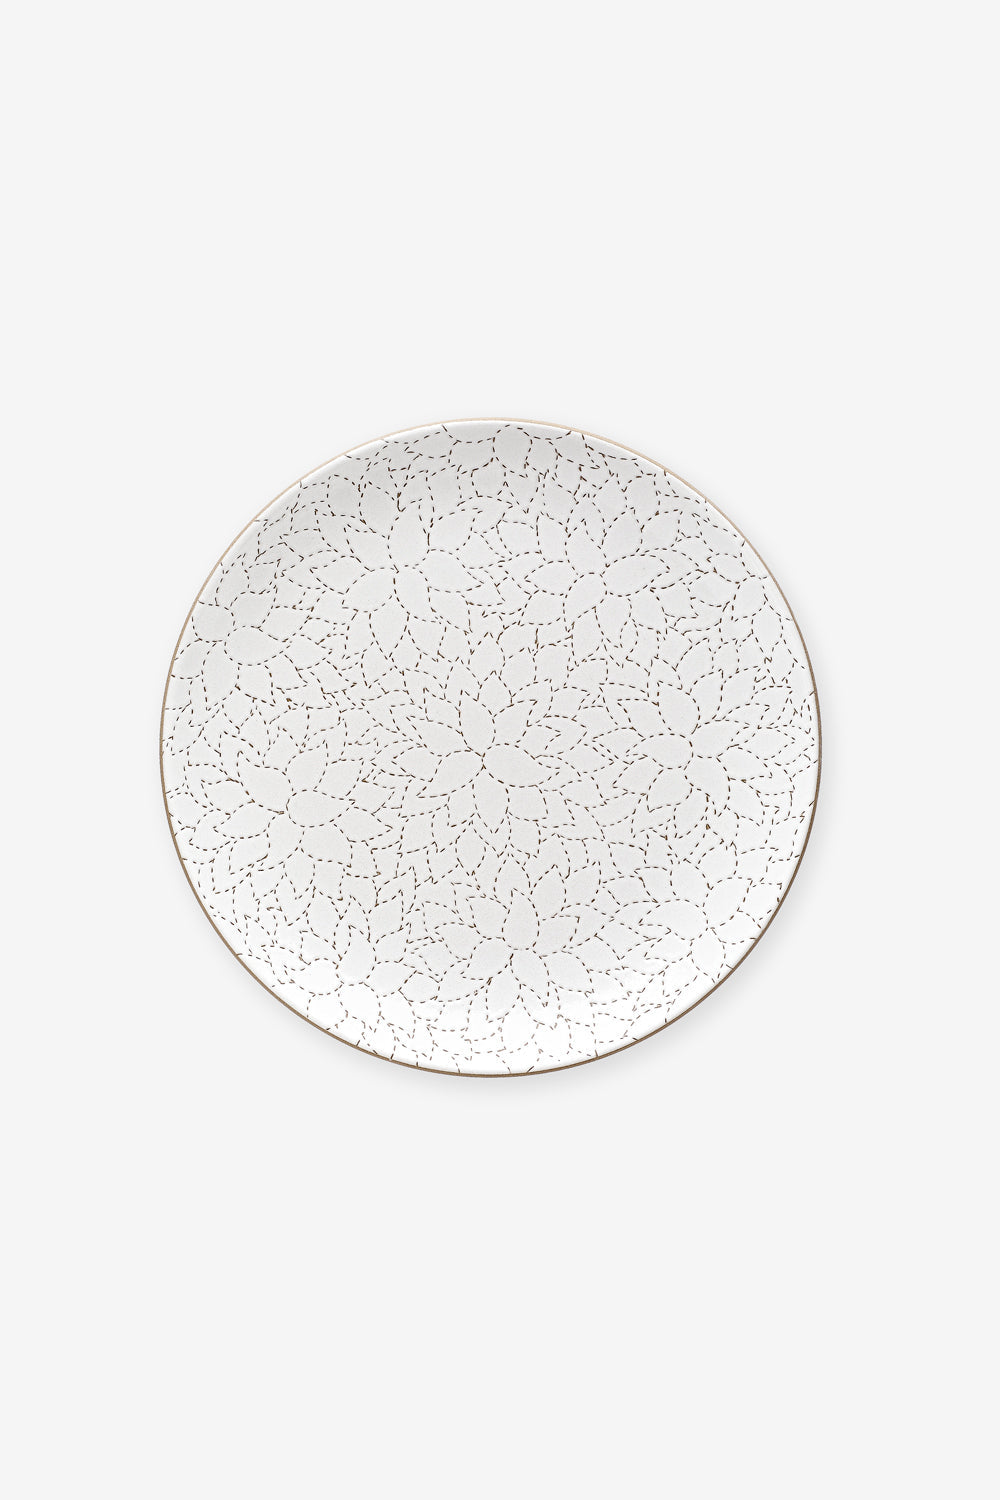 Alabama Chanin Camellia Etched Dinner Plate Heath Ceramics Hand-Etched Dinner Plate in White Floral Pattern